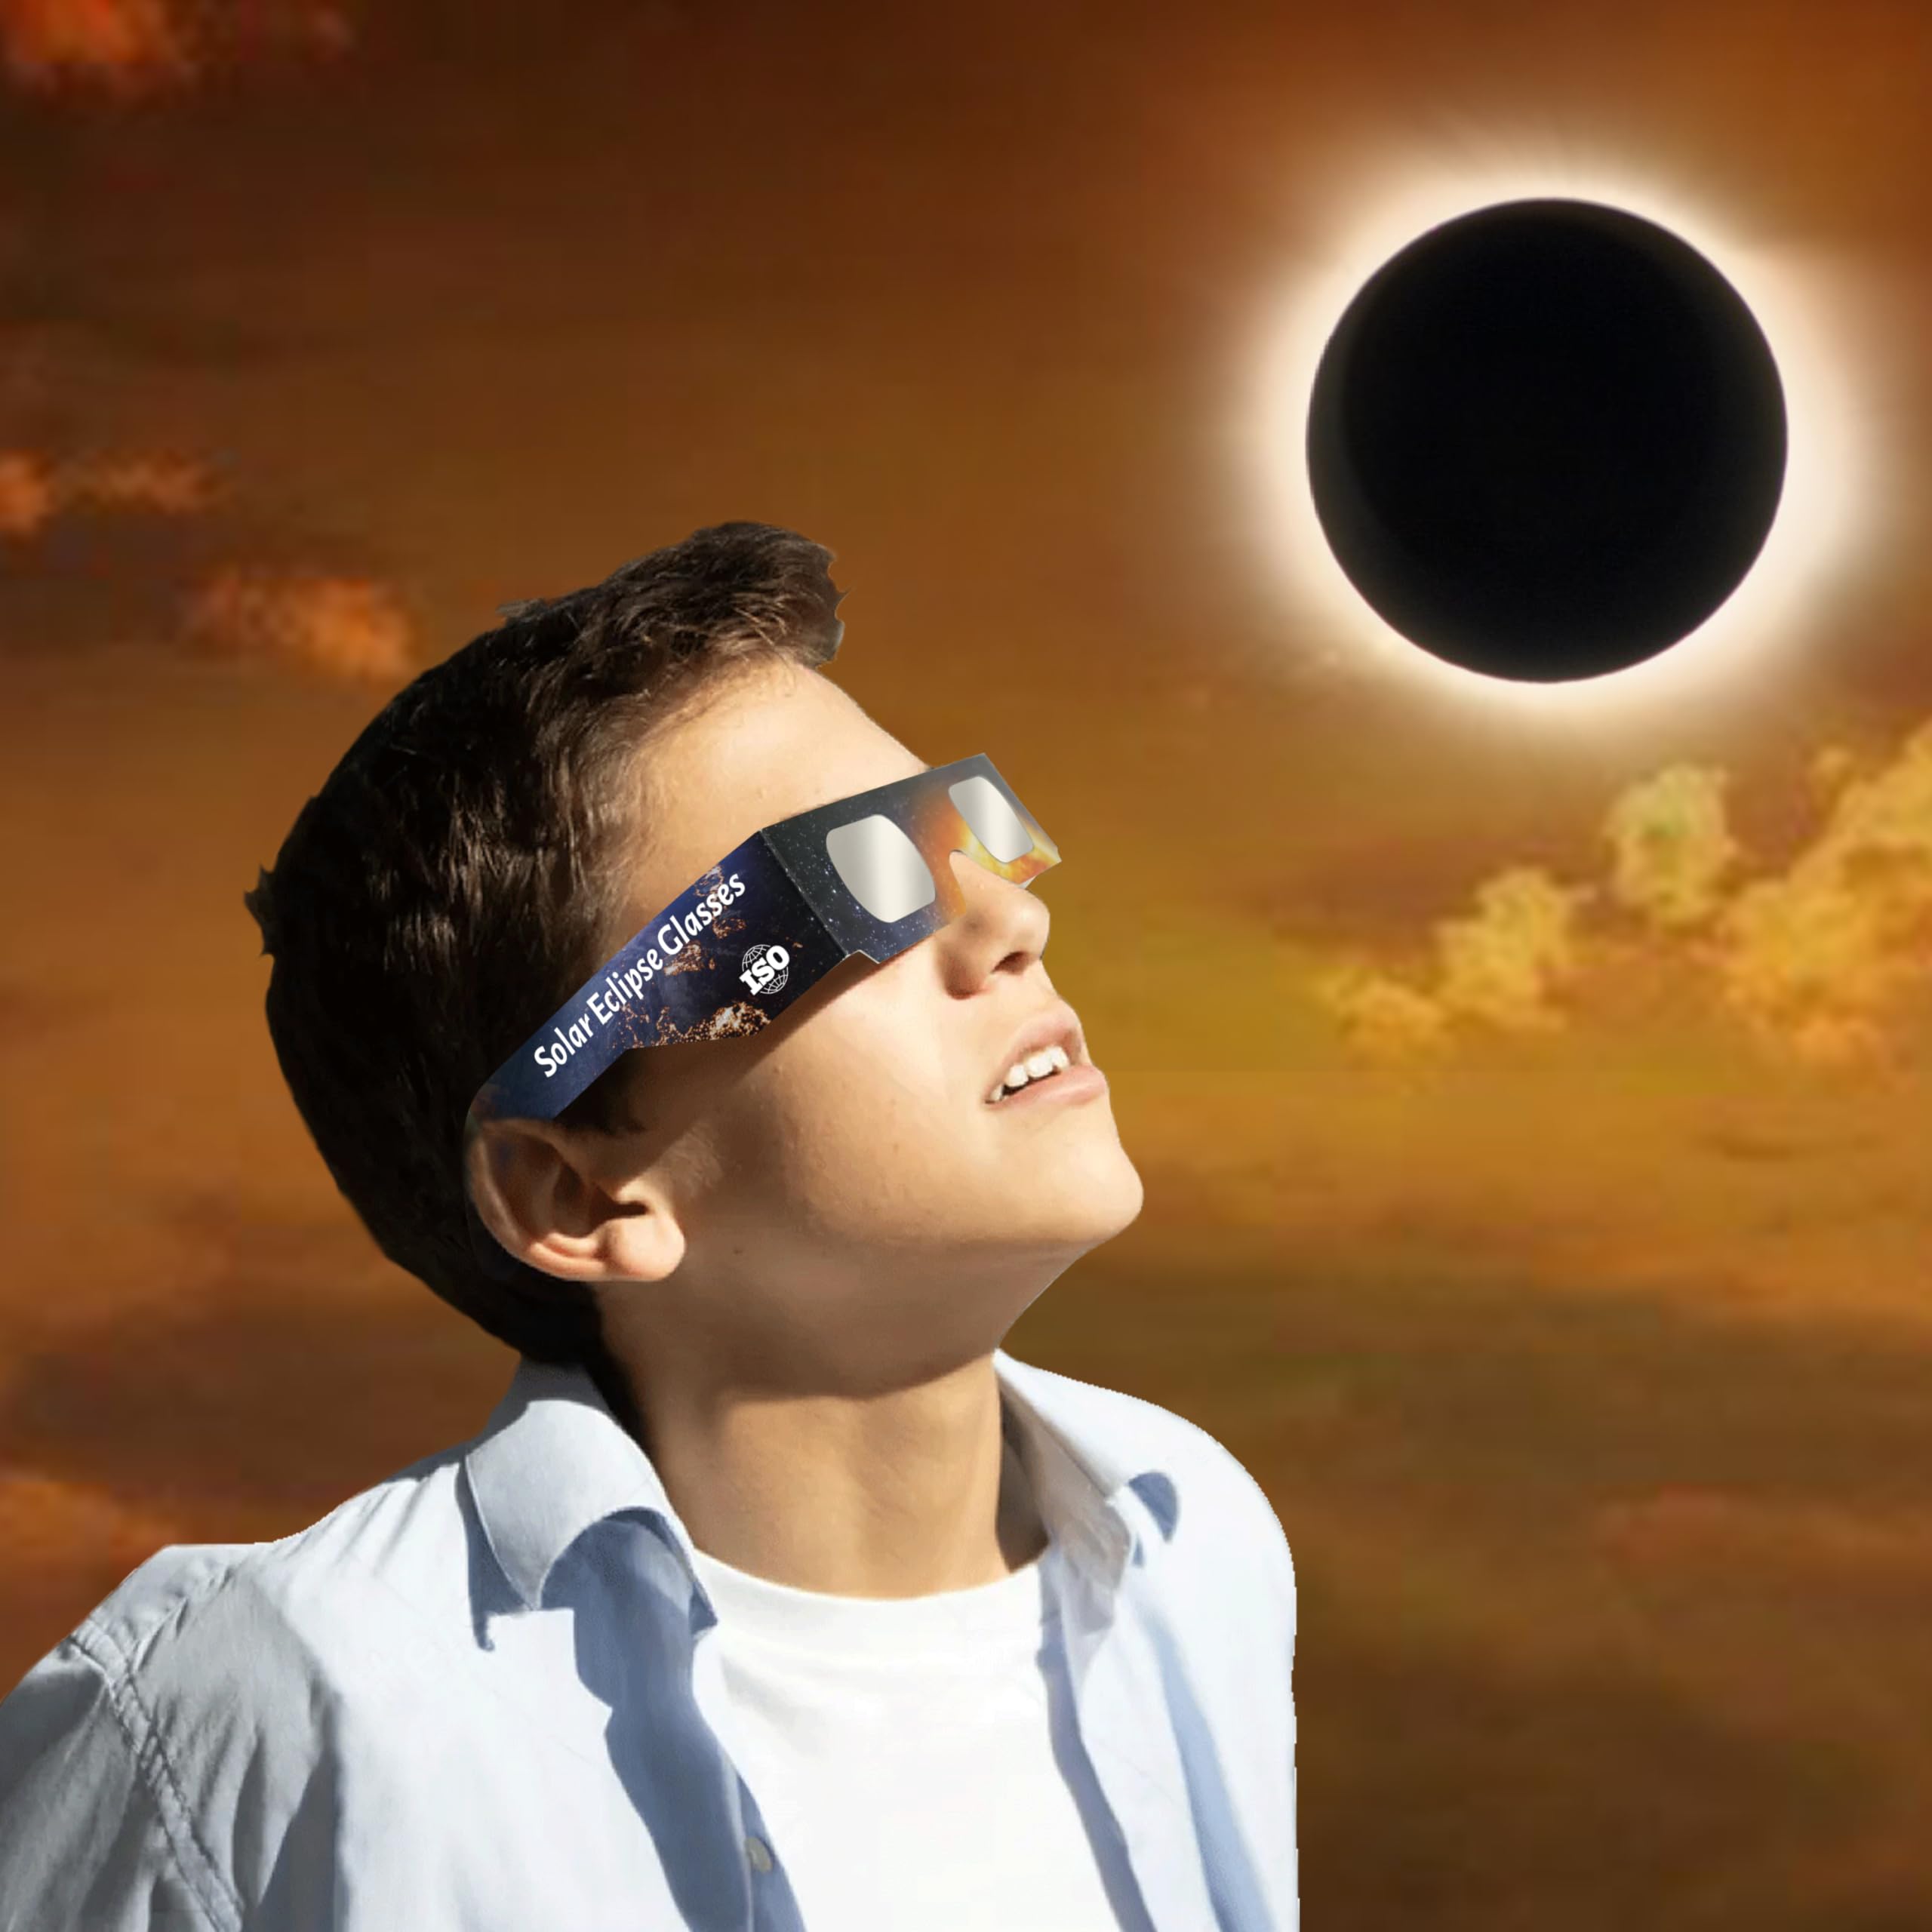 Oilkas Solar Eclipse Glasses Approved 2024 - Eclipse Glasses CE and ISO Certified Safe Shades, Direct Sun Viewing for Solar Eclipse (12 Packs)